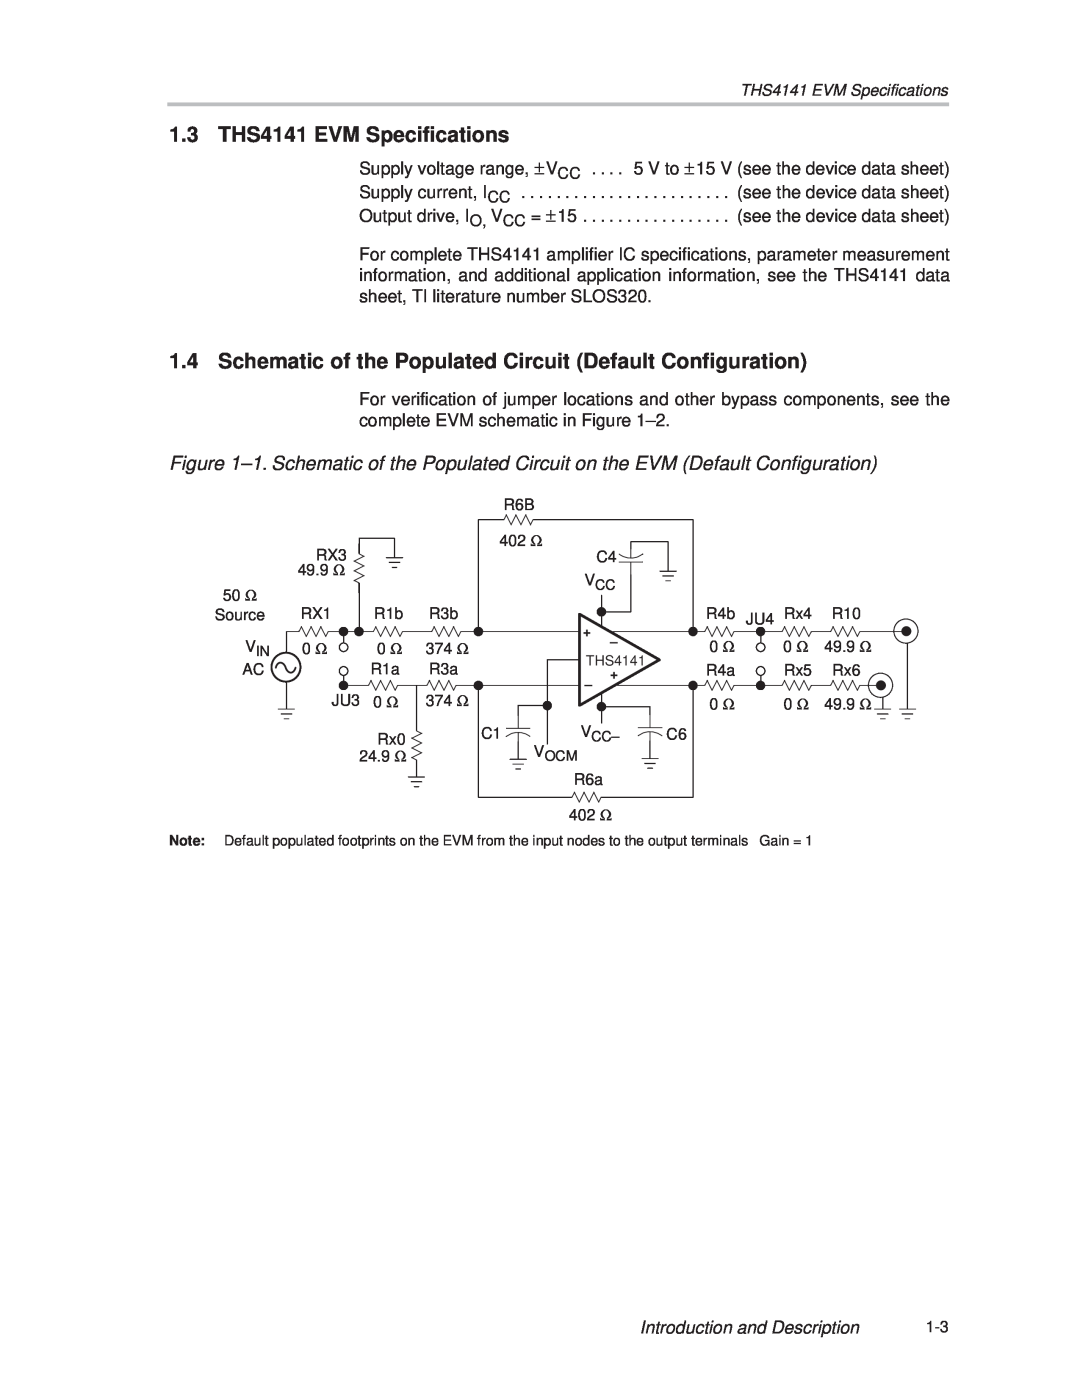 Texas Instruments manual 1.3 THS4141 EVM Specifications, Schematic of the Populated Circuit Default Configuration 